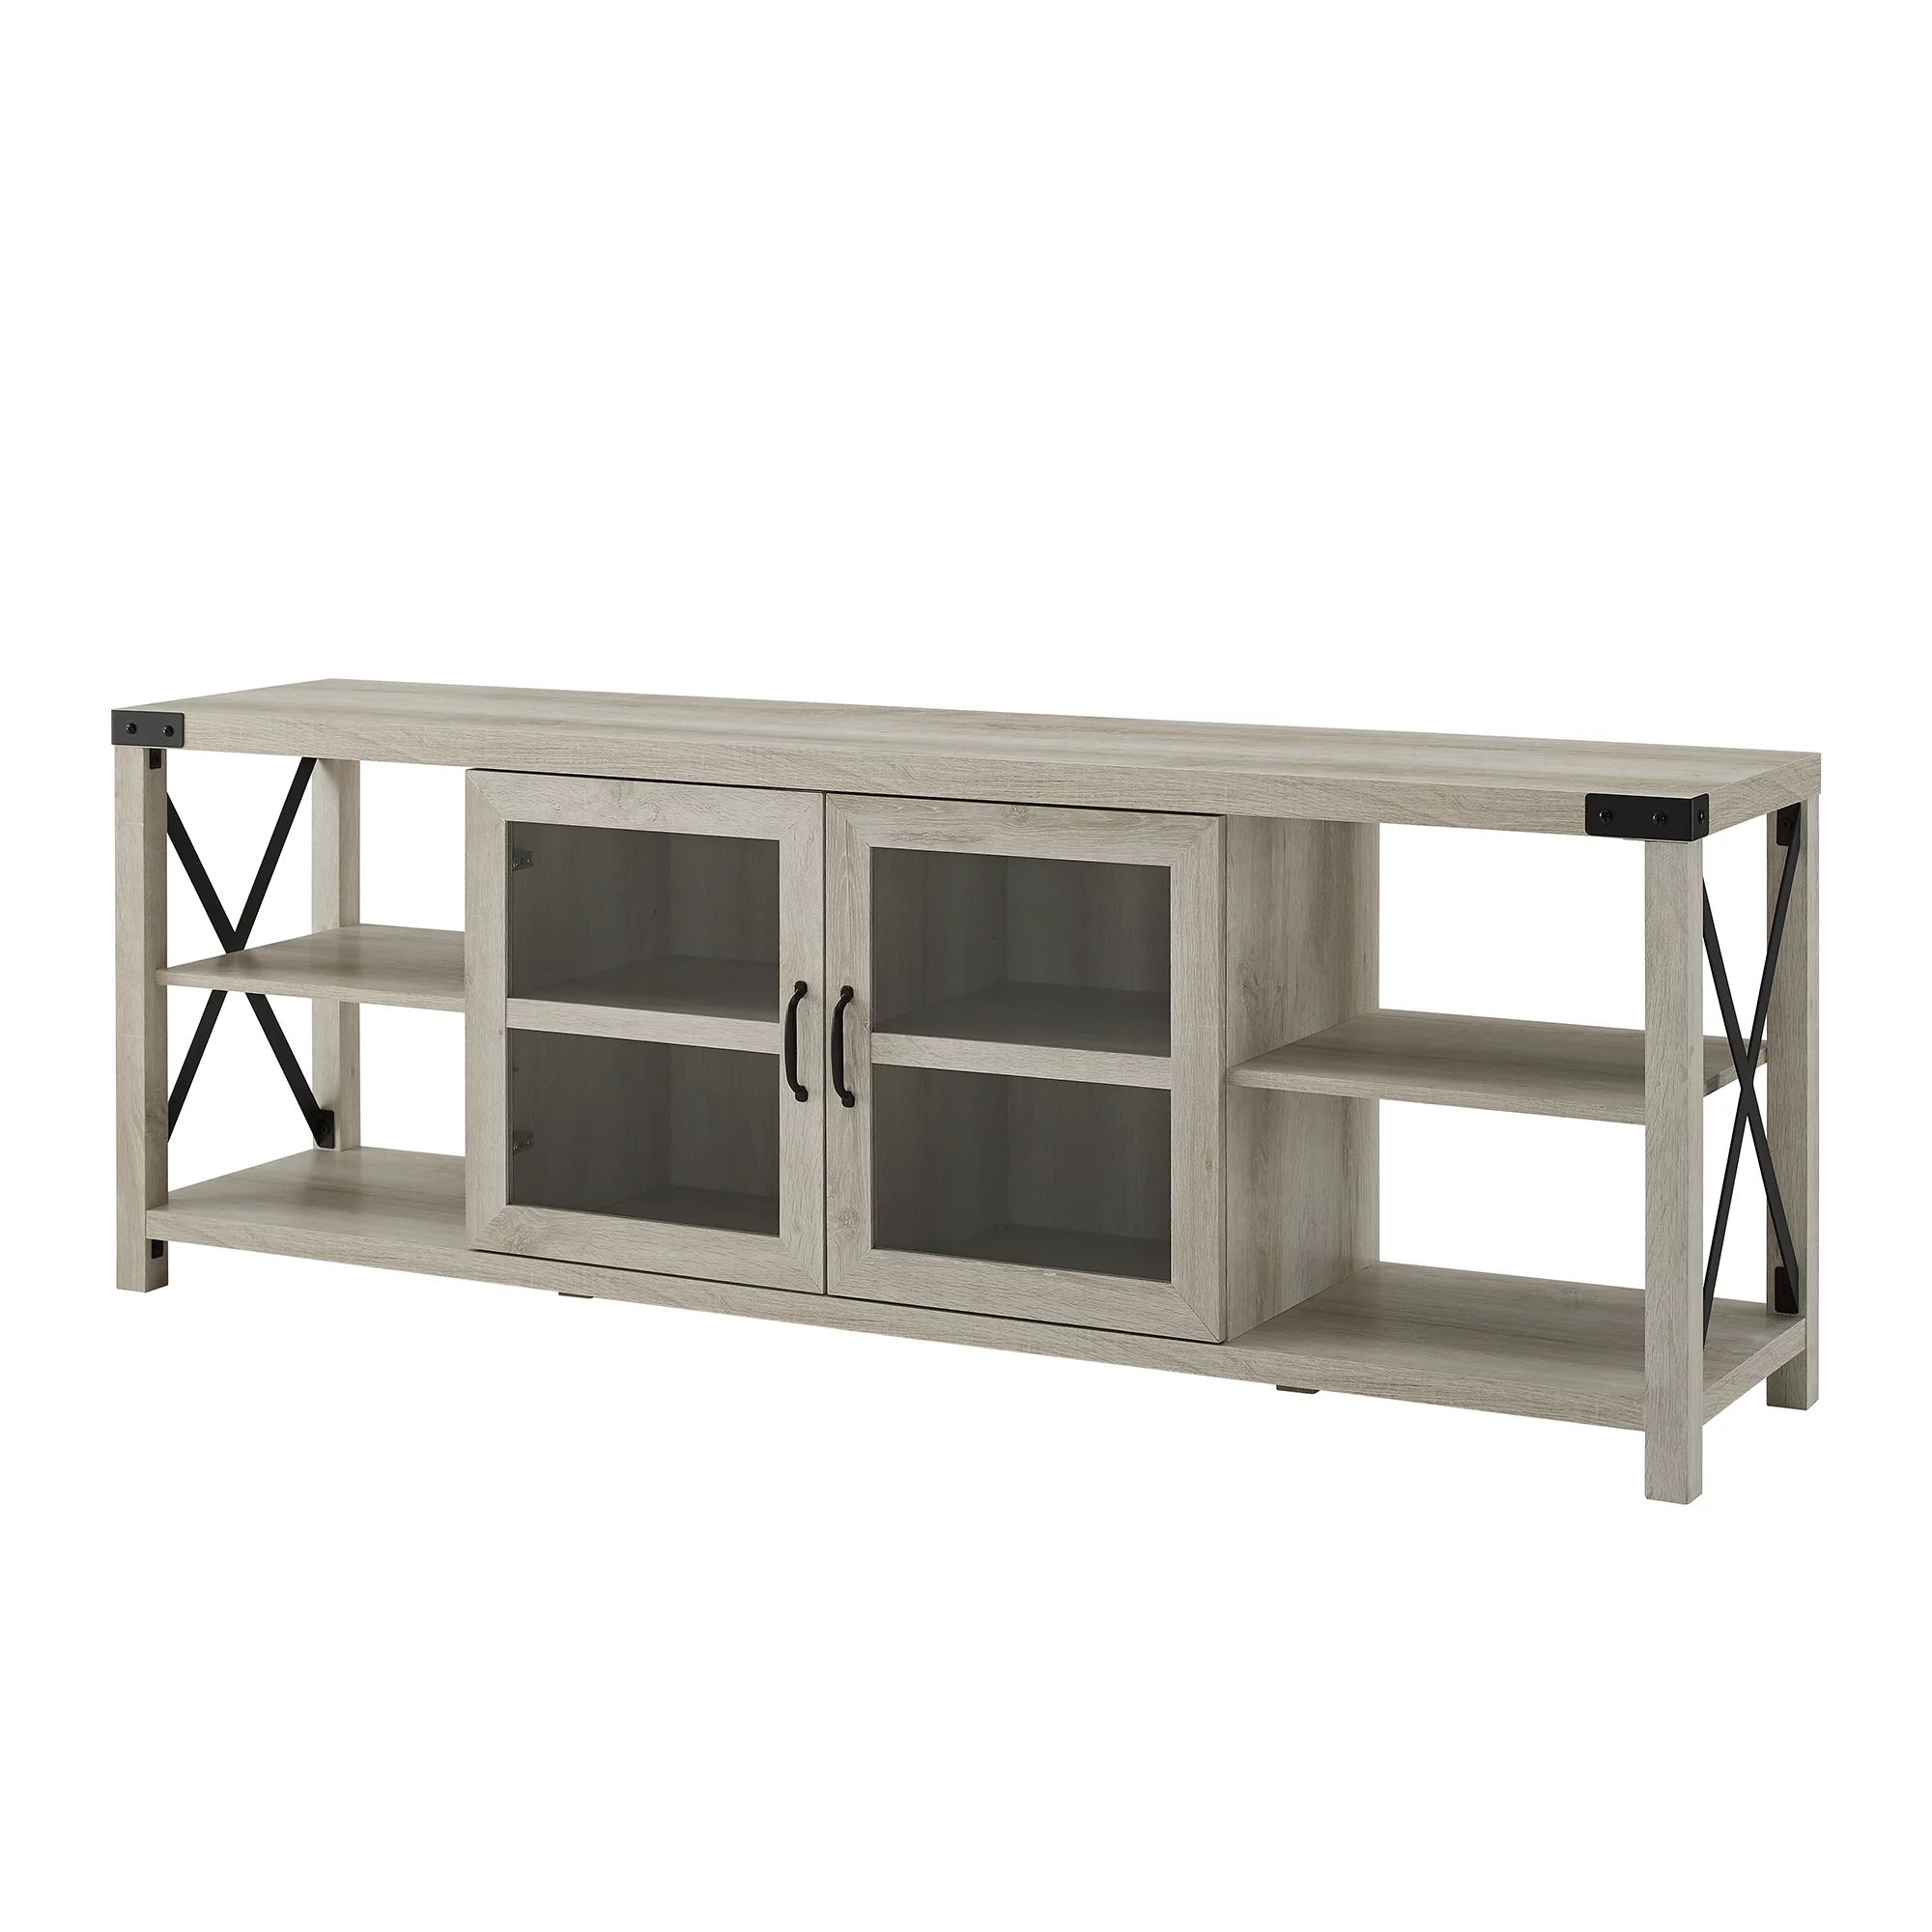 Woven Paths Farmhouse 2 Door Metal X TV Stand for TVs up to 80", White Oak | Walmart (US)